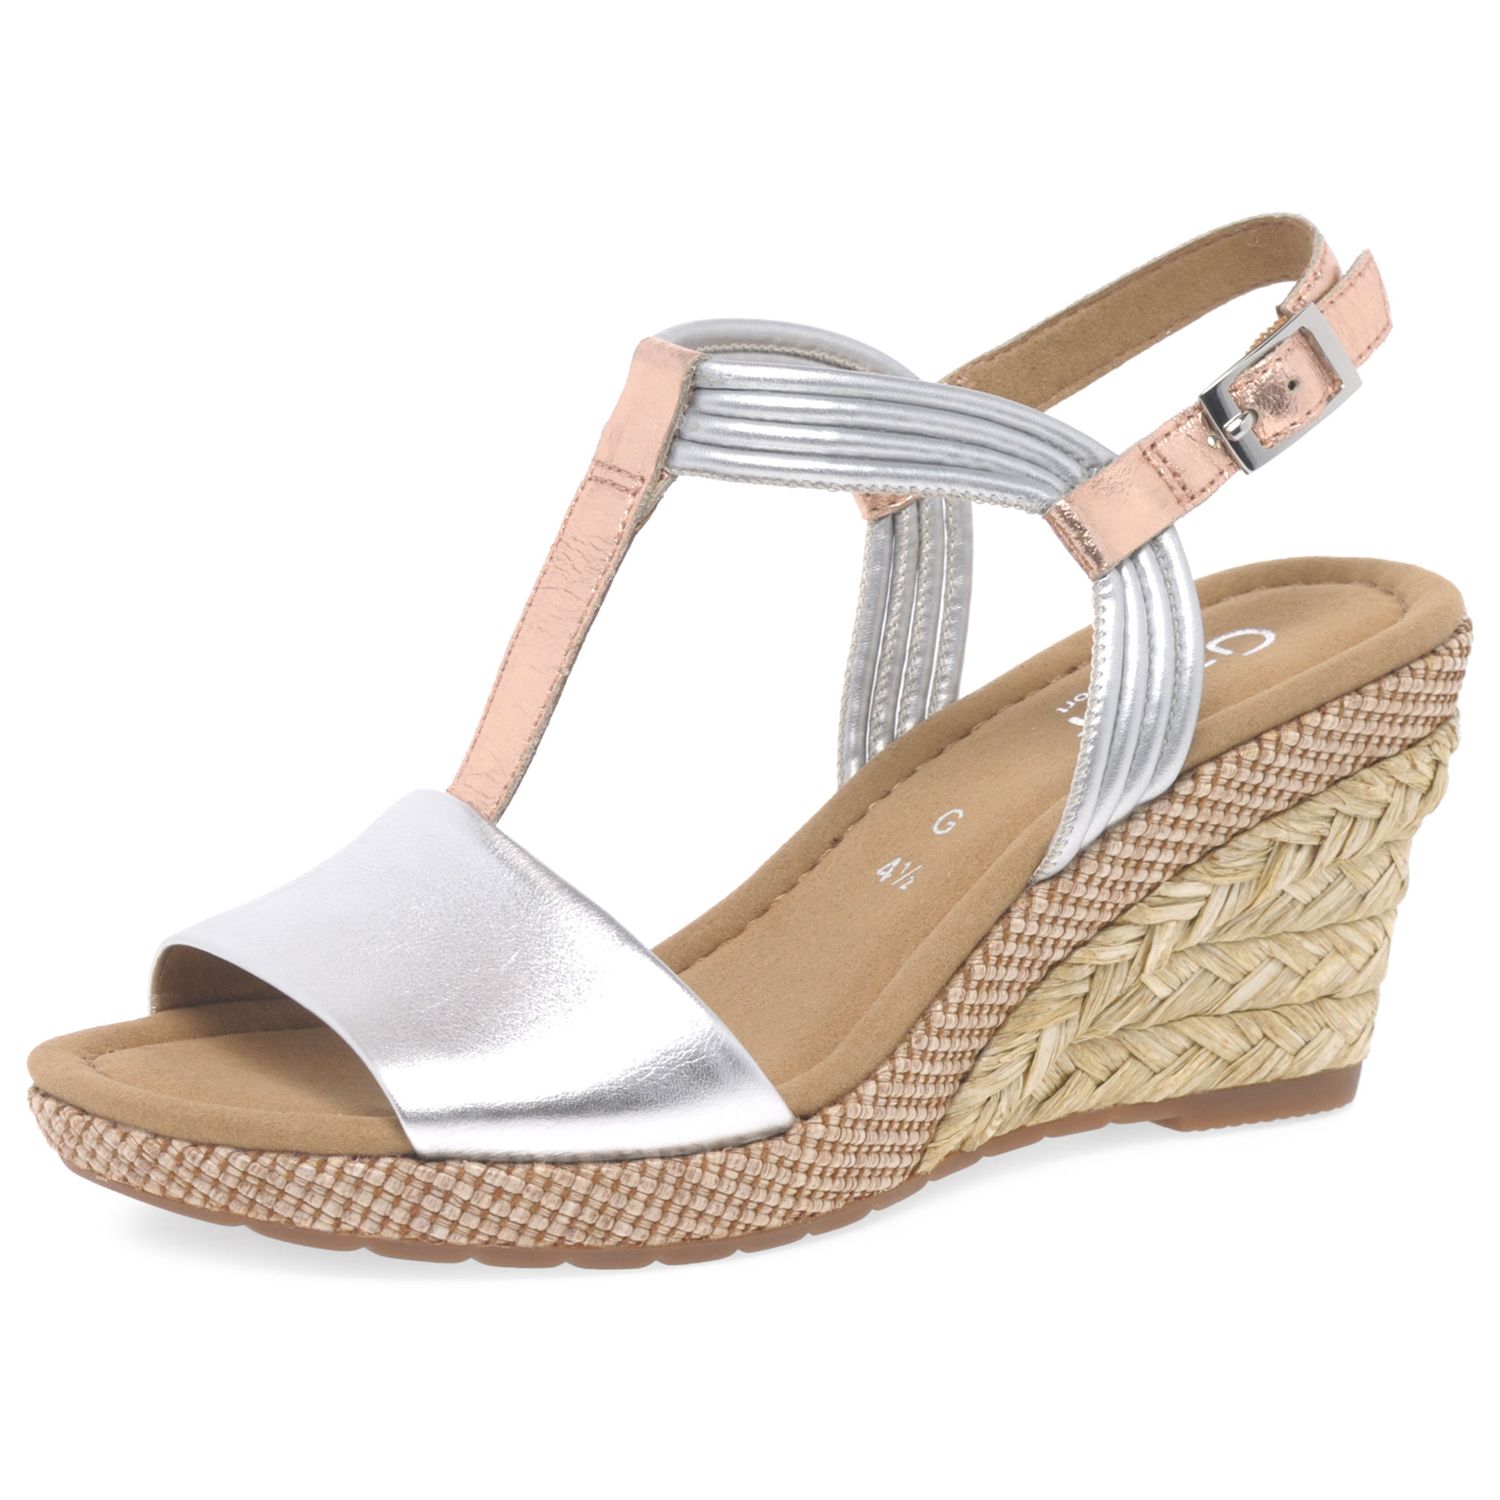 Gabor Jess Wide Fit Wedge Heeled Sandals, Silver Leather at John Lewis